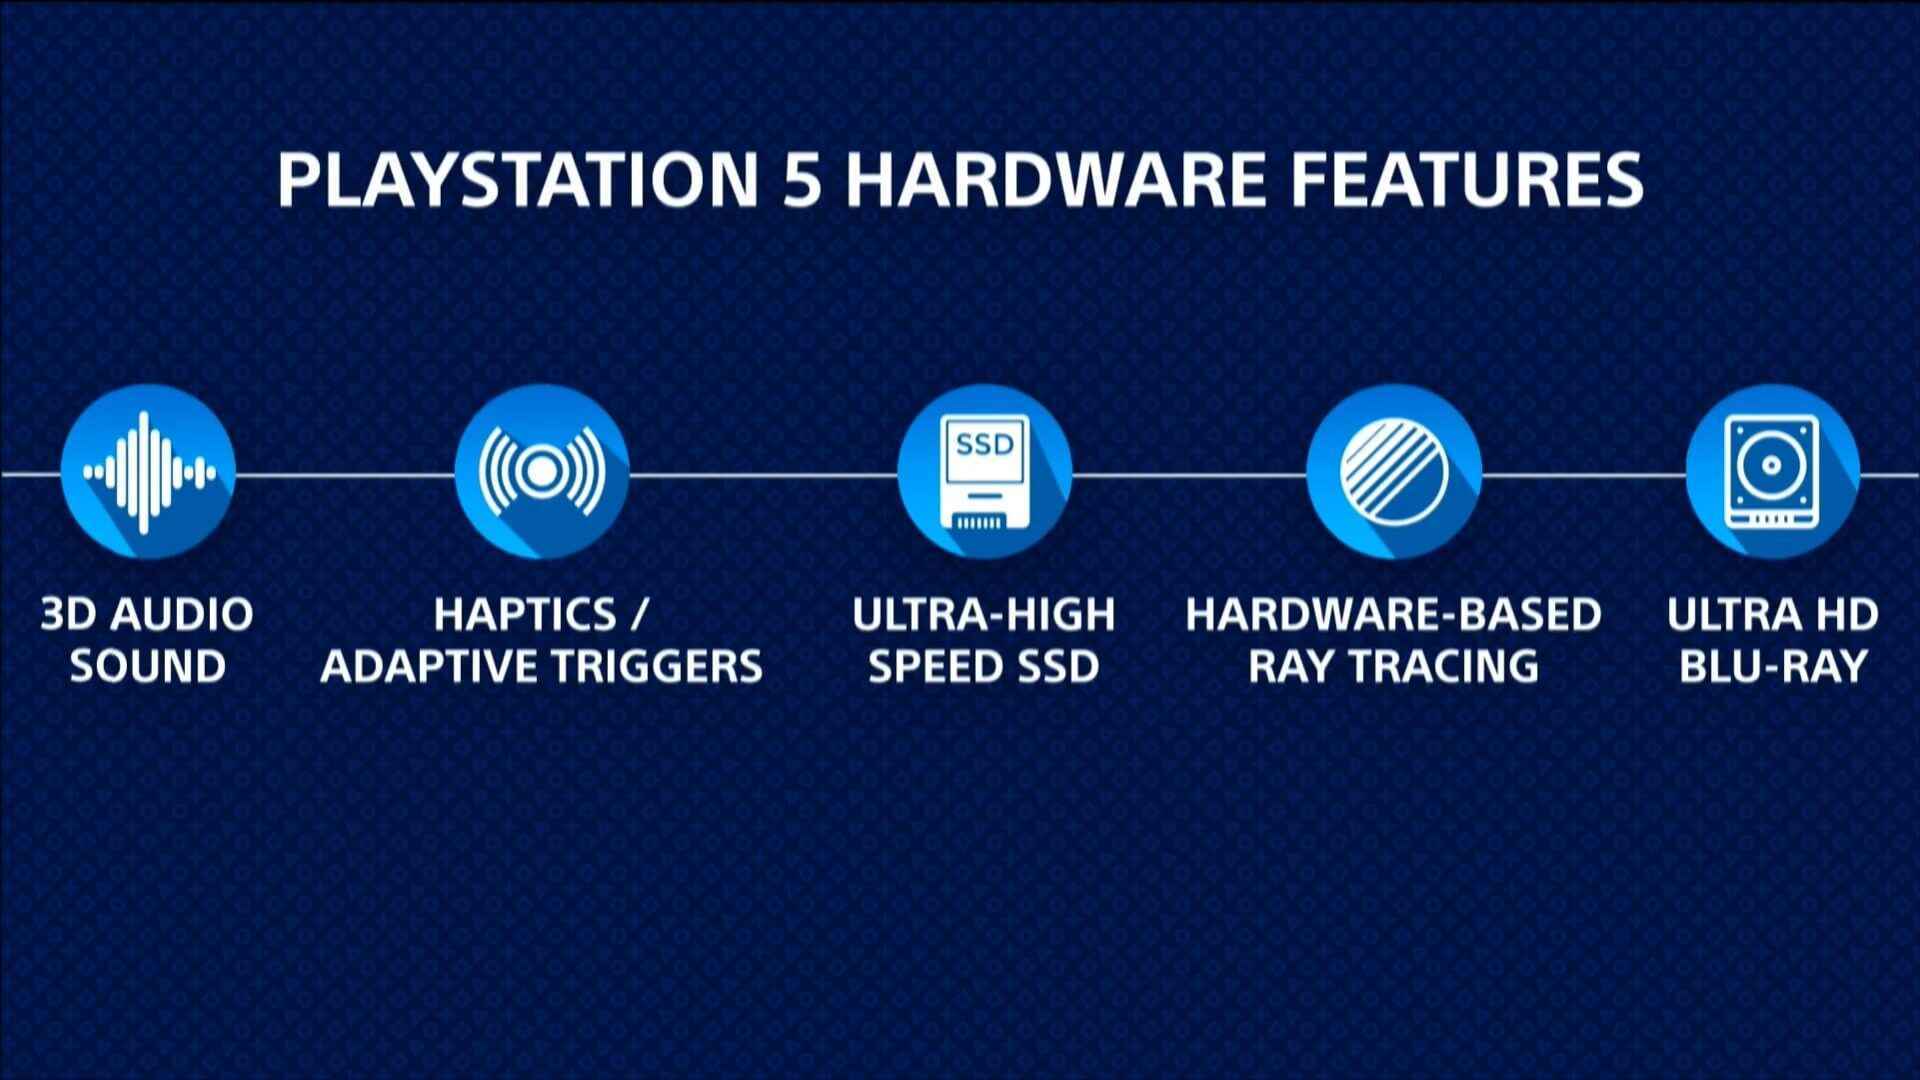 PlayStation 5 Hardware Features